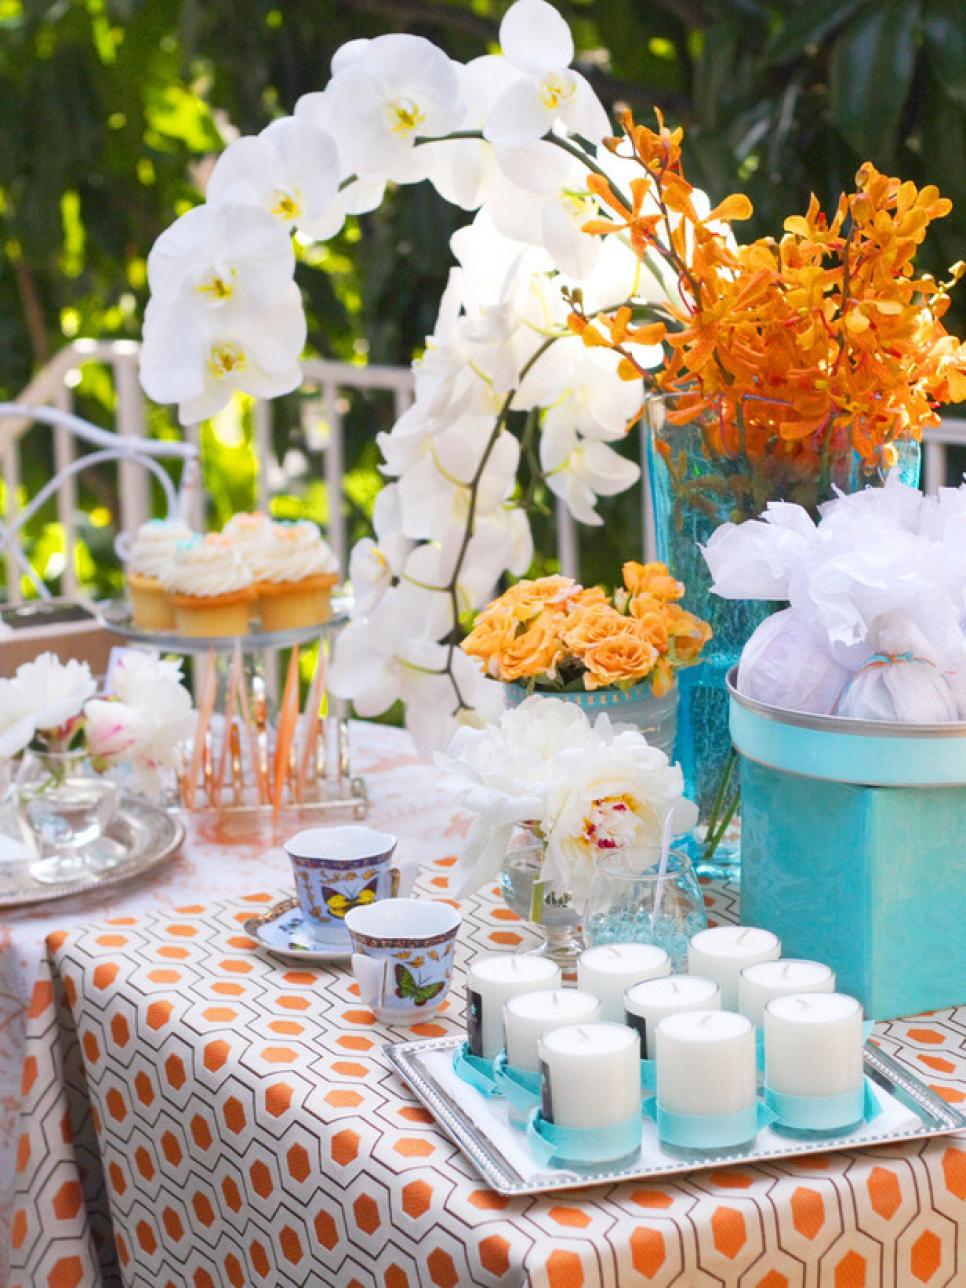 Outdoor Party Decorating Ideas : Food Network | Summer ...